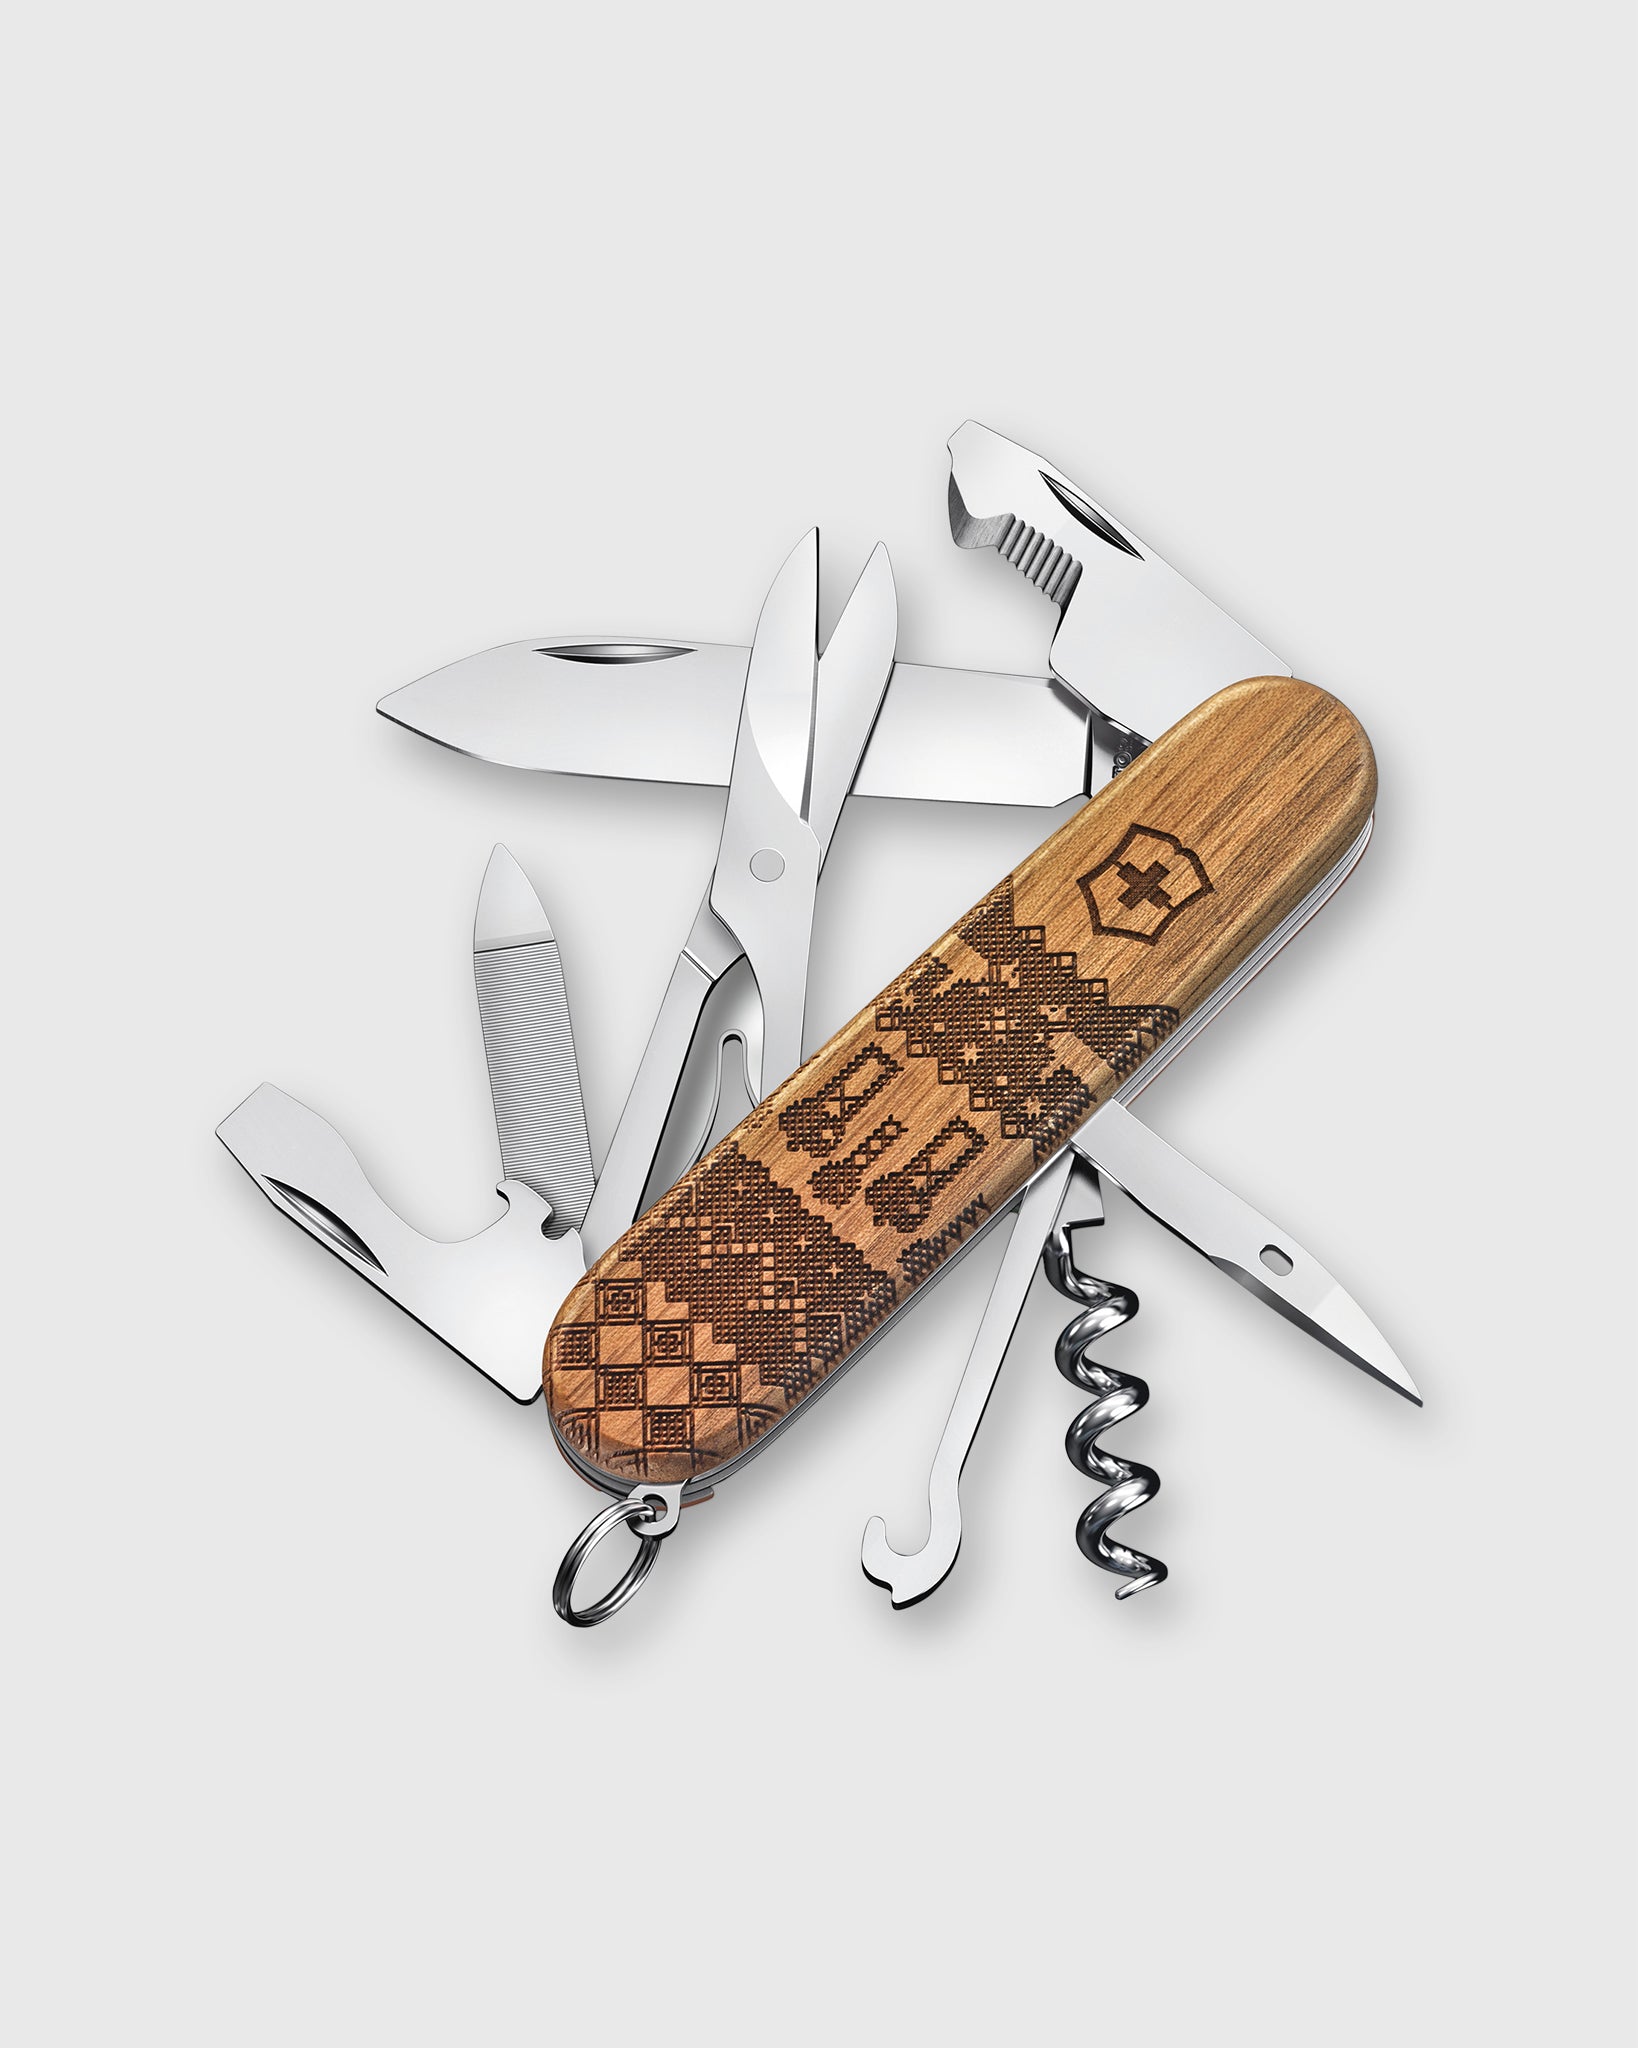 Limited Edition Swiss Army Collector's Knife in Swiss Spirit